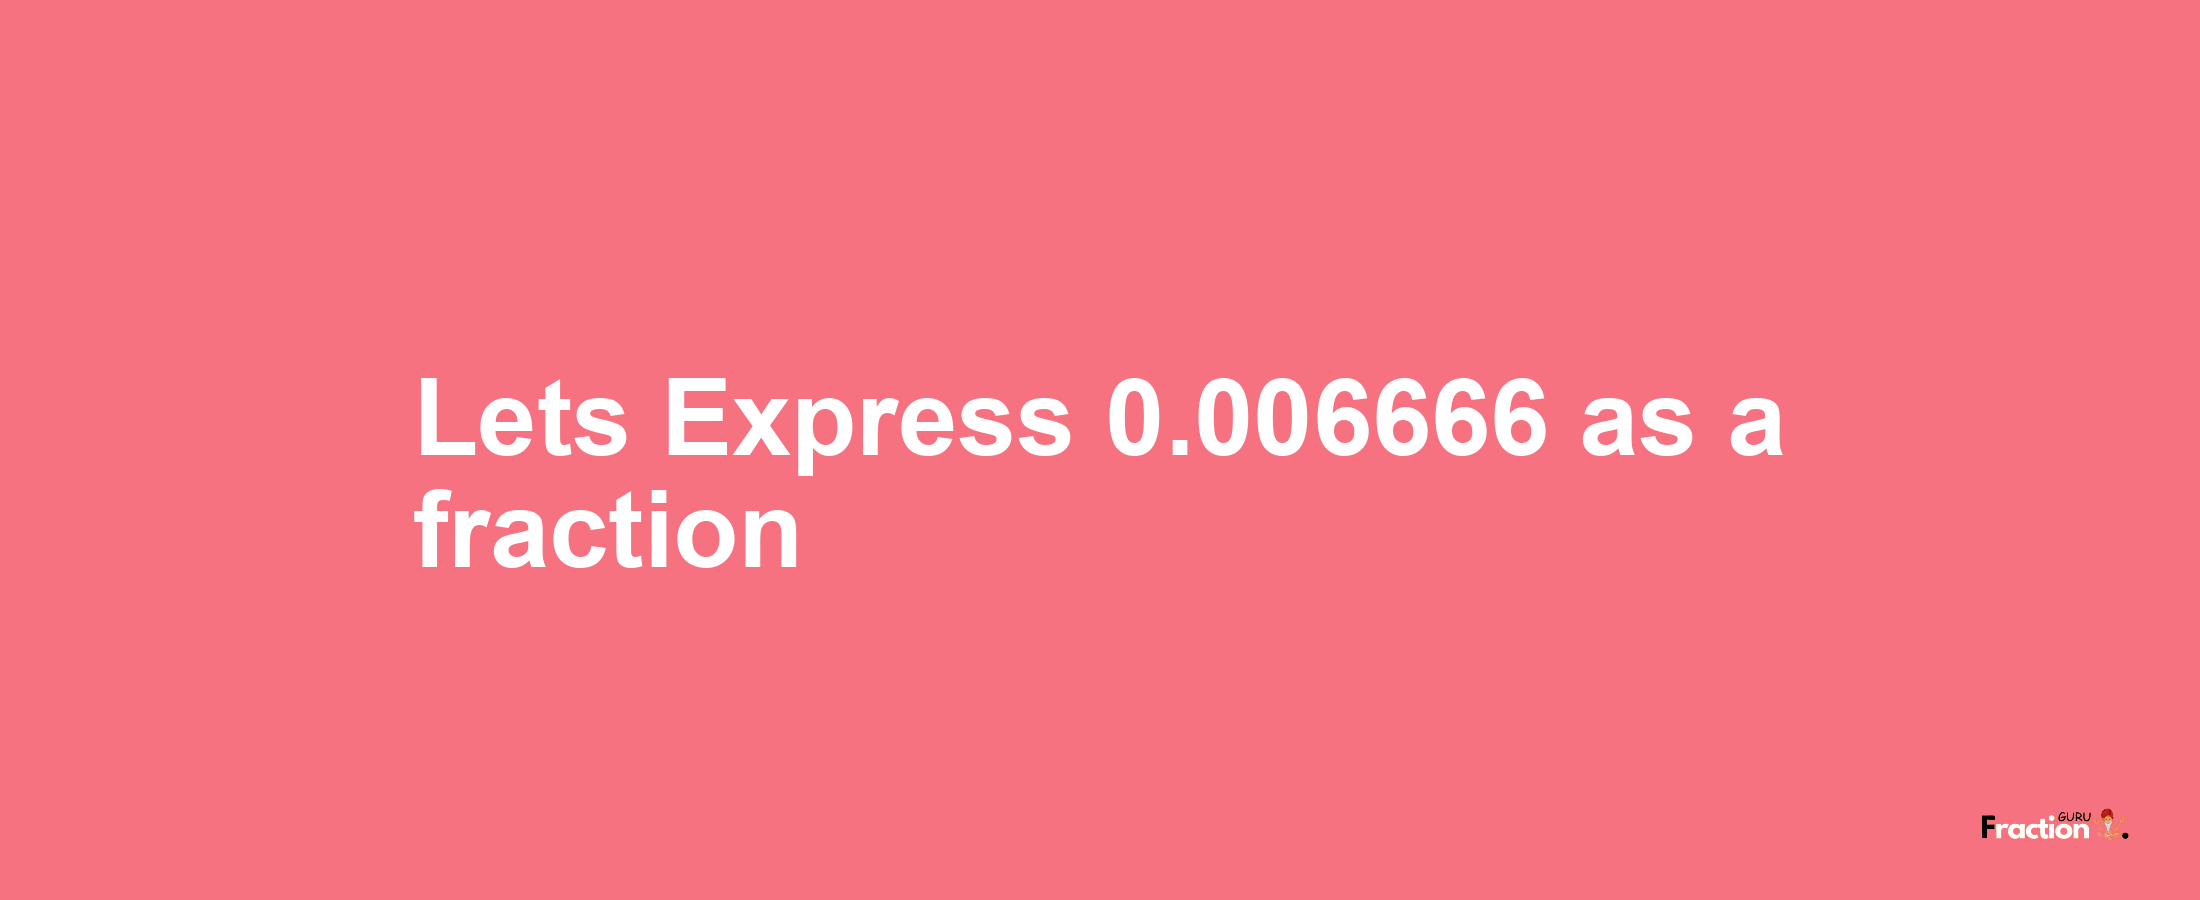 Lets Express 0.006666 as afraction